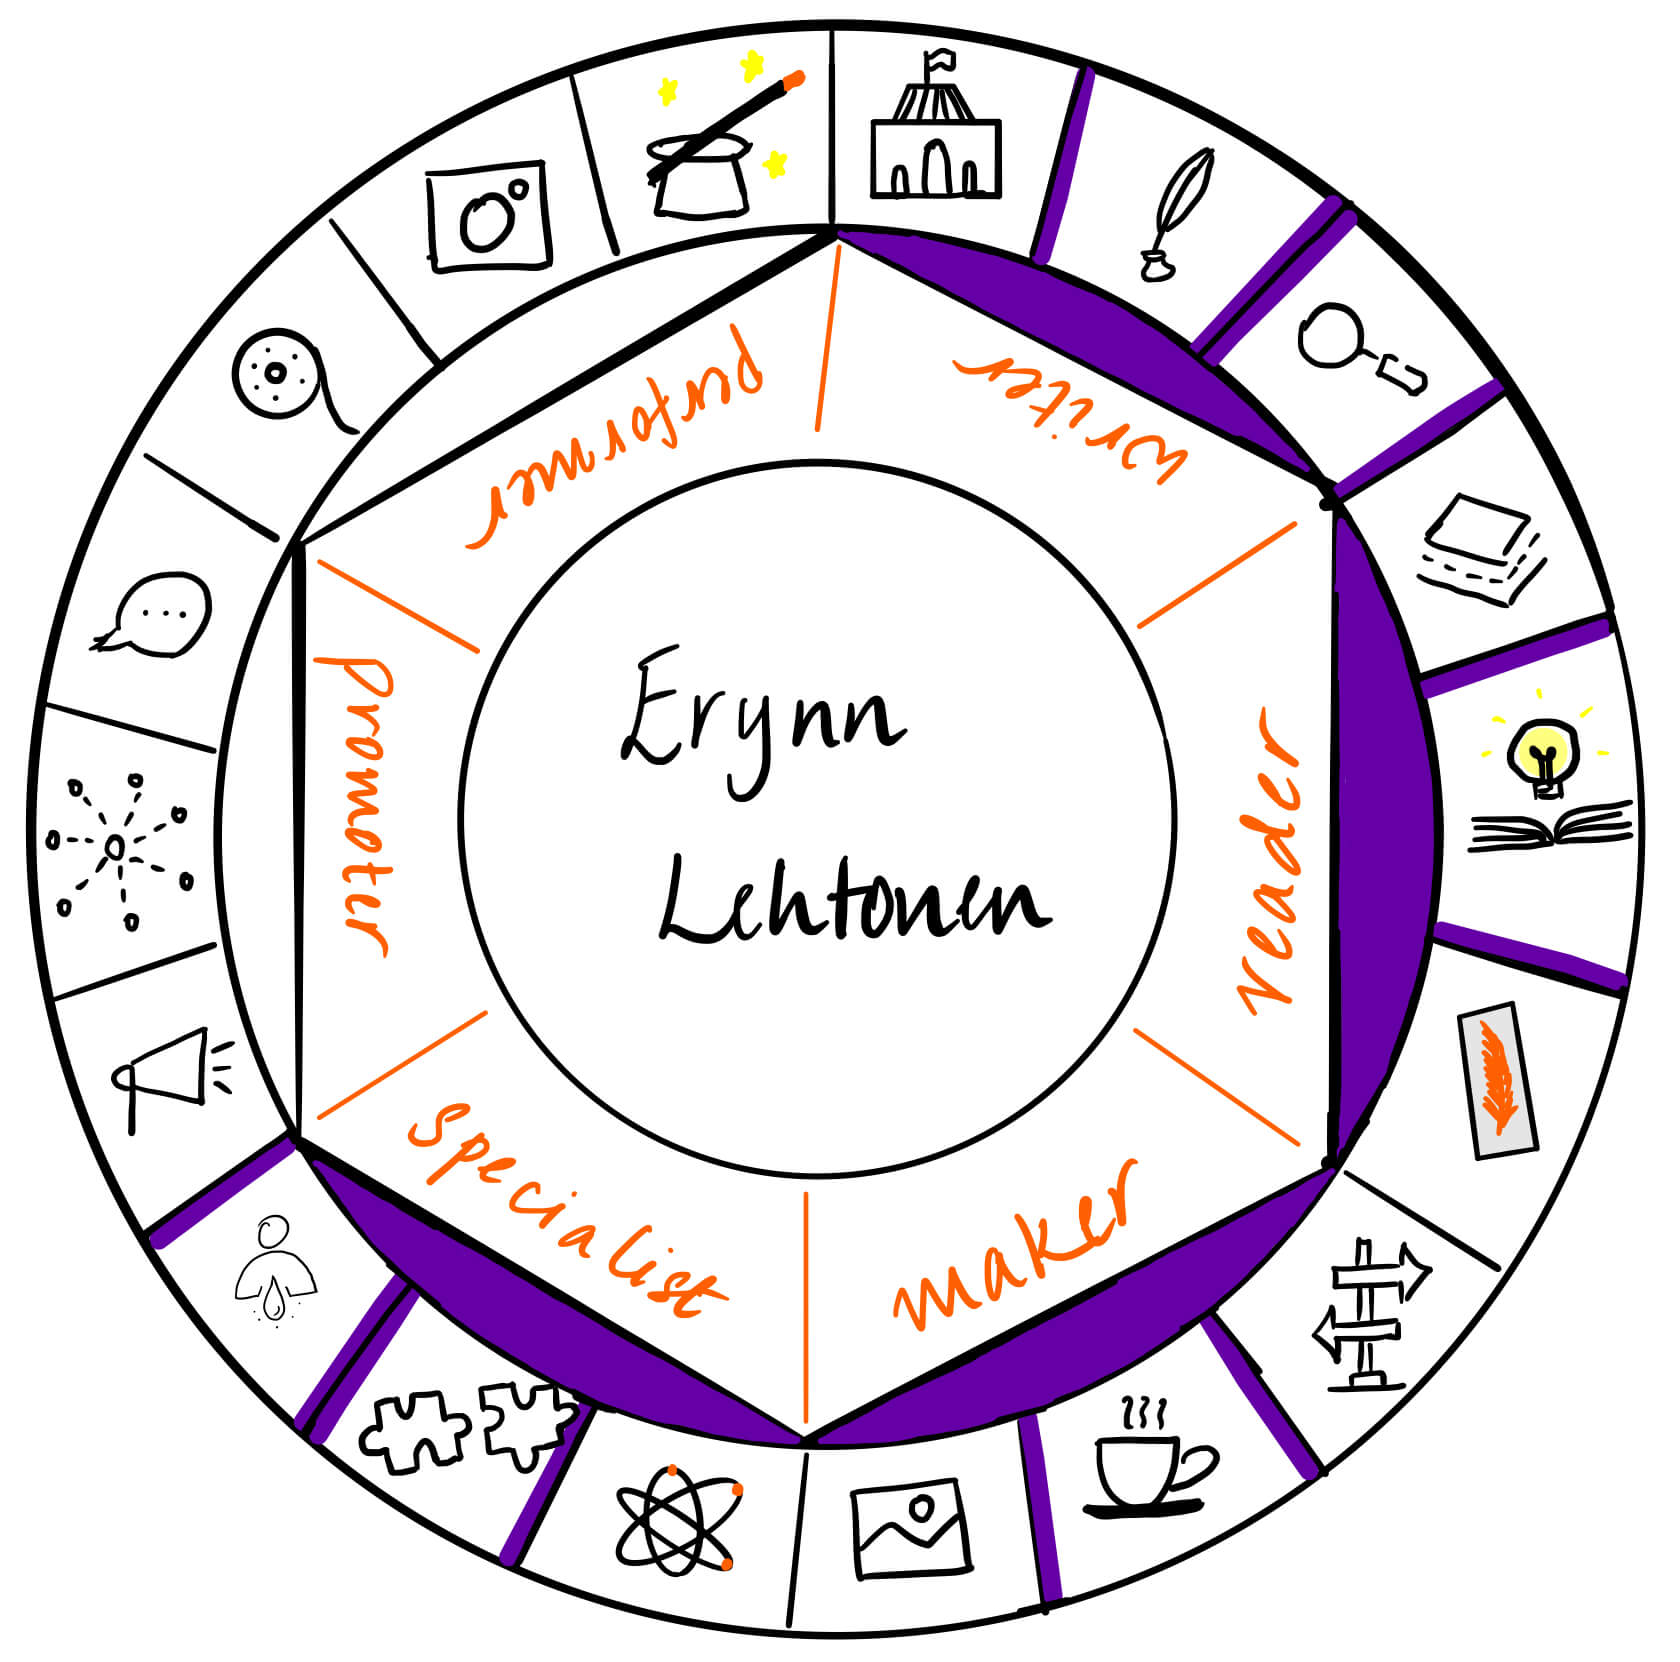 Erynn Lehtonen is a specialist, reader, maker and writer. She is writing about the process of reworking a series on Creator’s Roulette today.